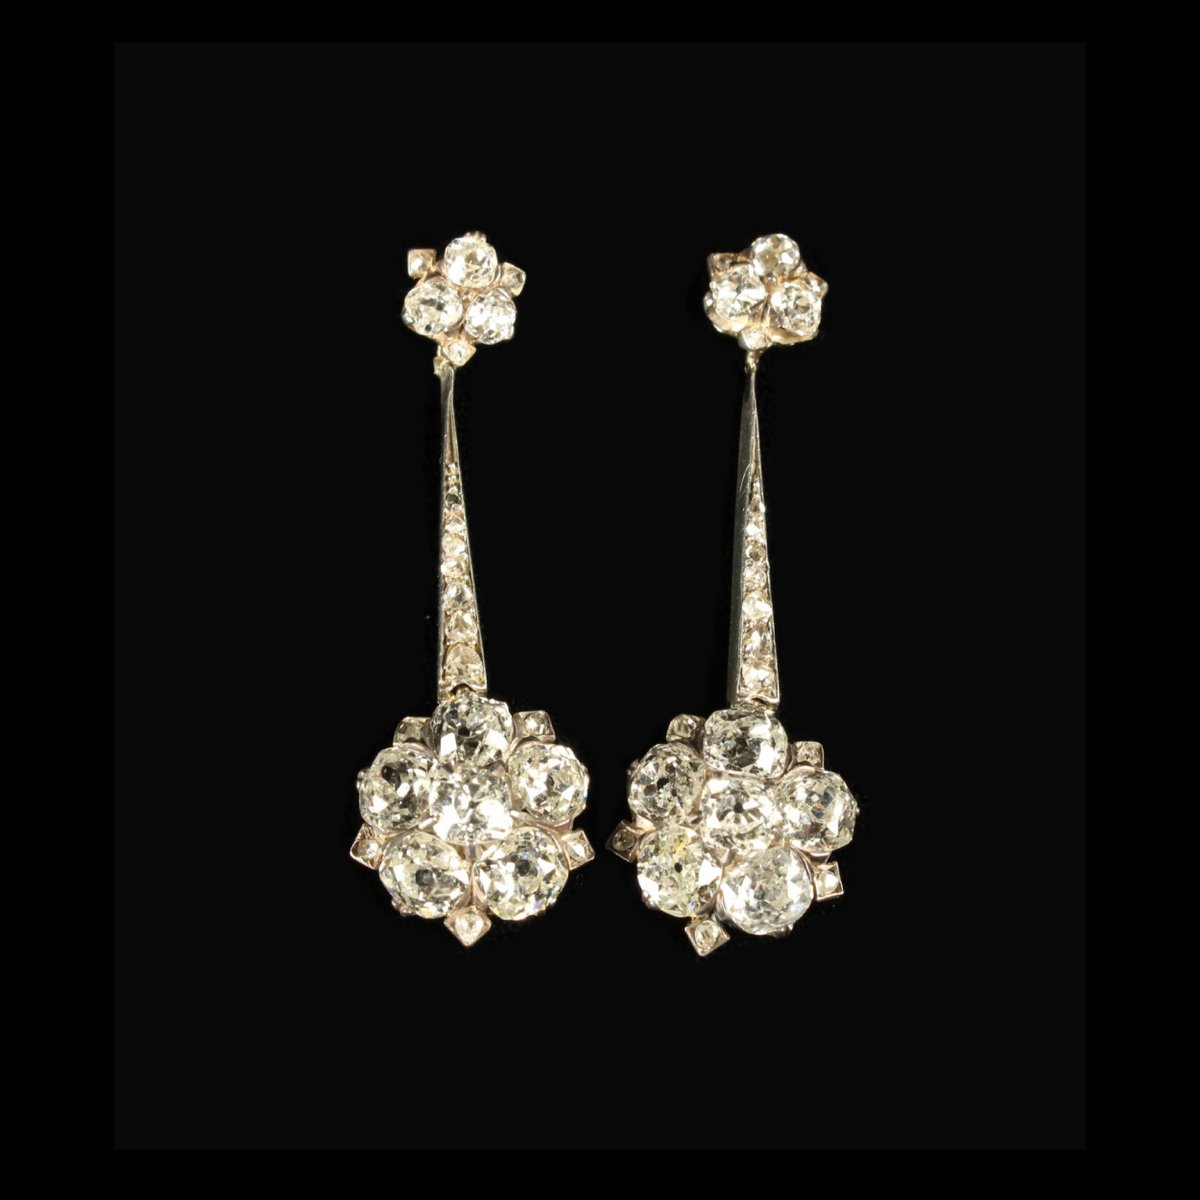 Recent Sale find for a lucky new owner. A Pair of 9 Carat White and Yellow Gold, Diamond Drop Earrings. Hammer £1,500. #auction #onlineauction #auctionhouse #auctioneer #vintage #auctioneers #bid #antiques #antique #auctionswork #collection #sale #finefurniture #furniture